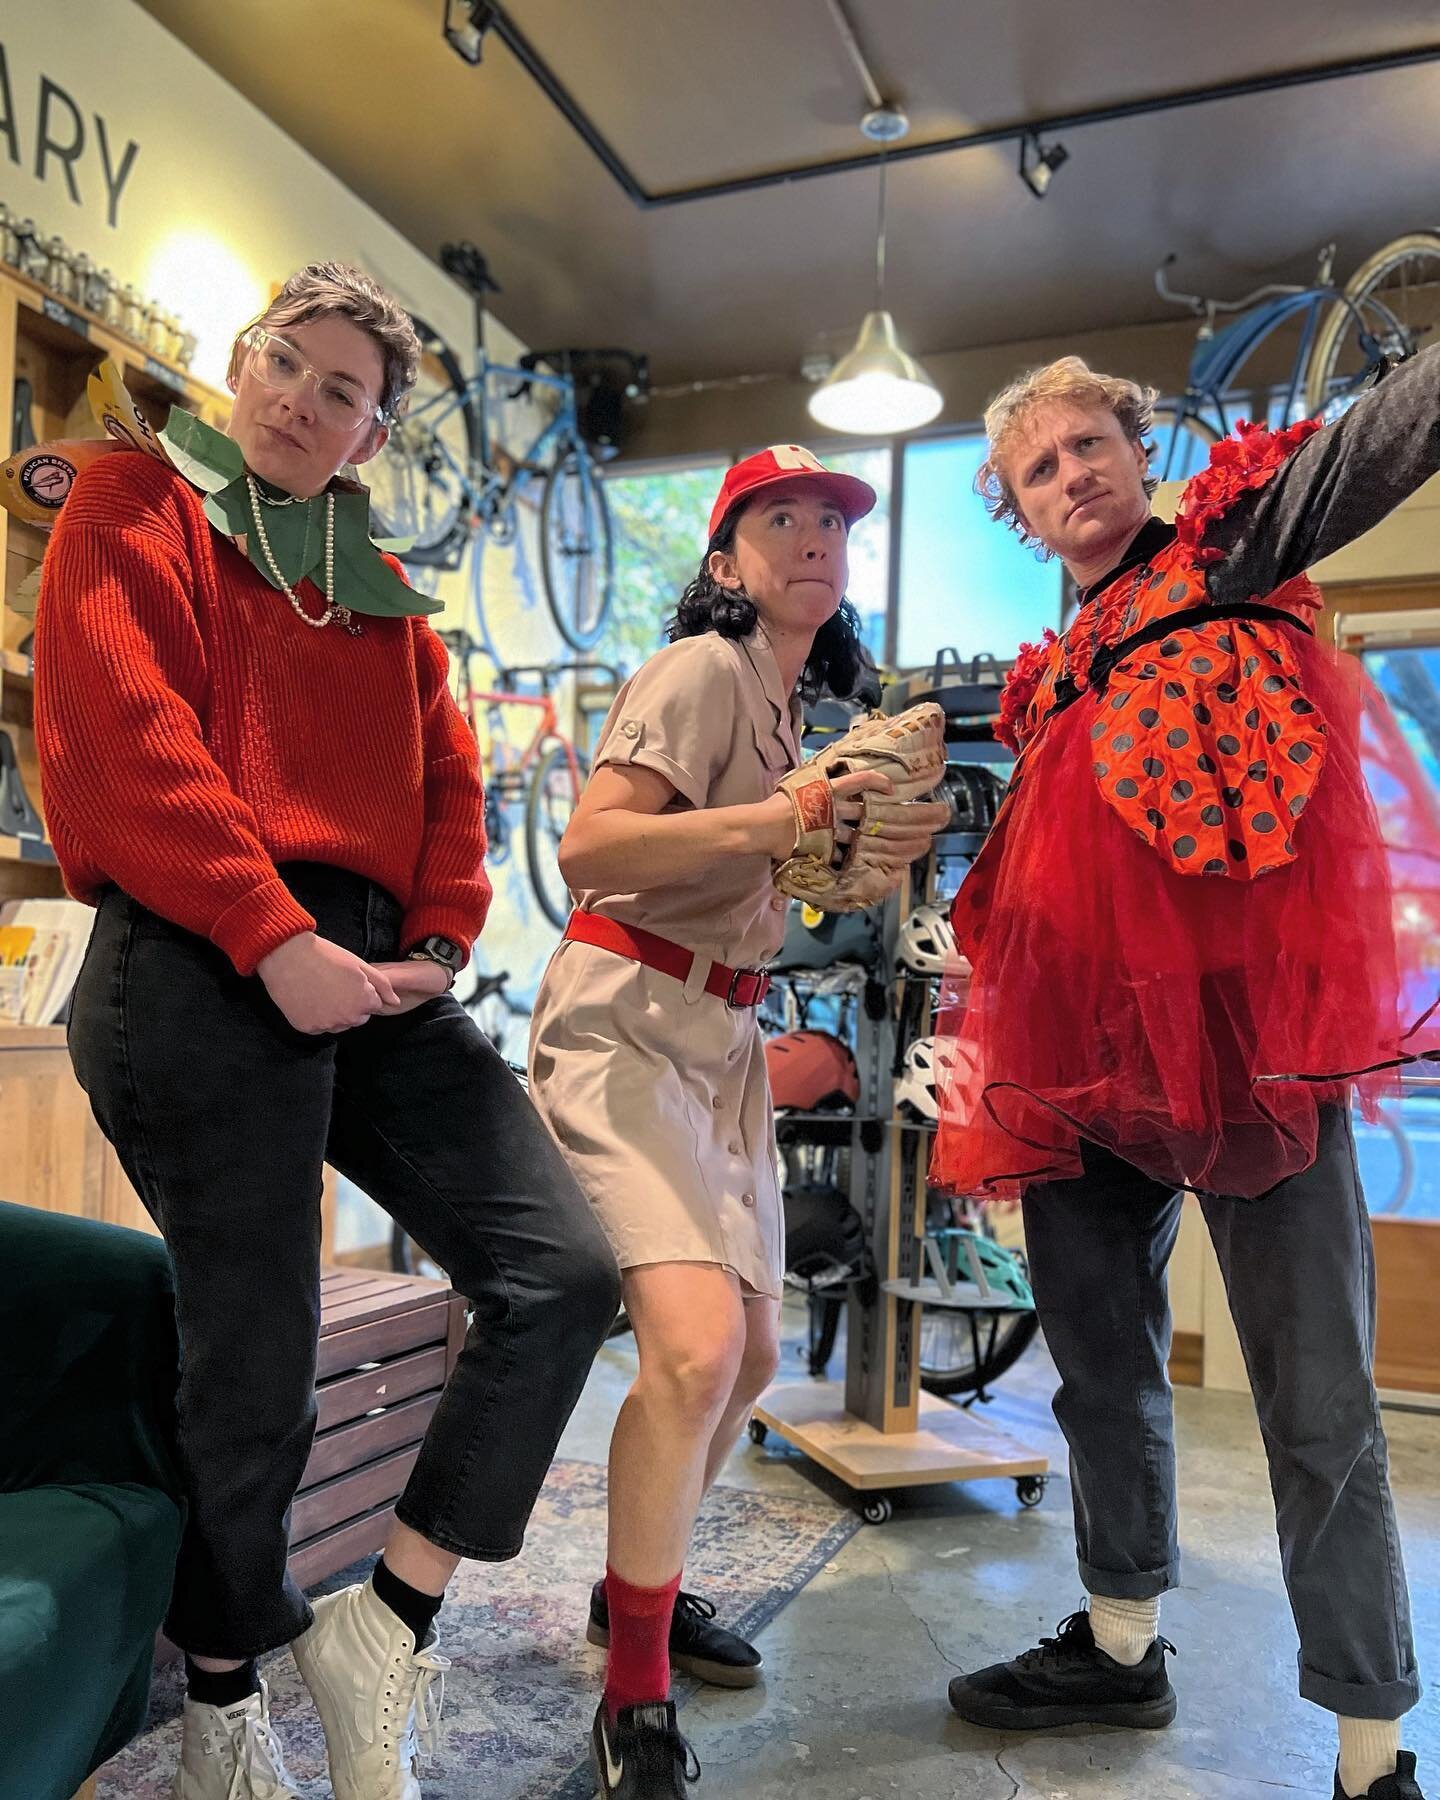 This Heirloom Tomato, Rockford Peach, and Lady Bug ran out of candy, but we didn&rsquo;t run out of spirit. 
Loved seeing all the costumes on Alberta after last years real soaker of a Halloween! 
Great job all and thanks @albertamainstreet for gettin